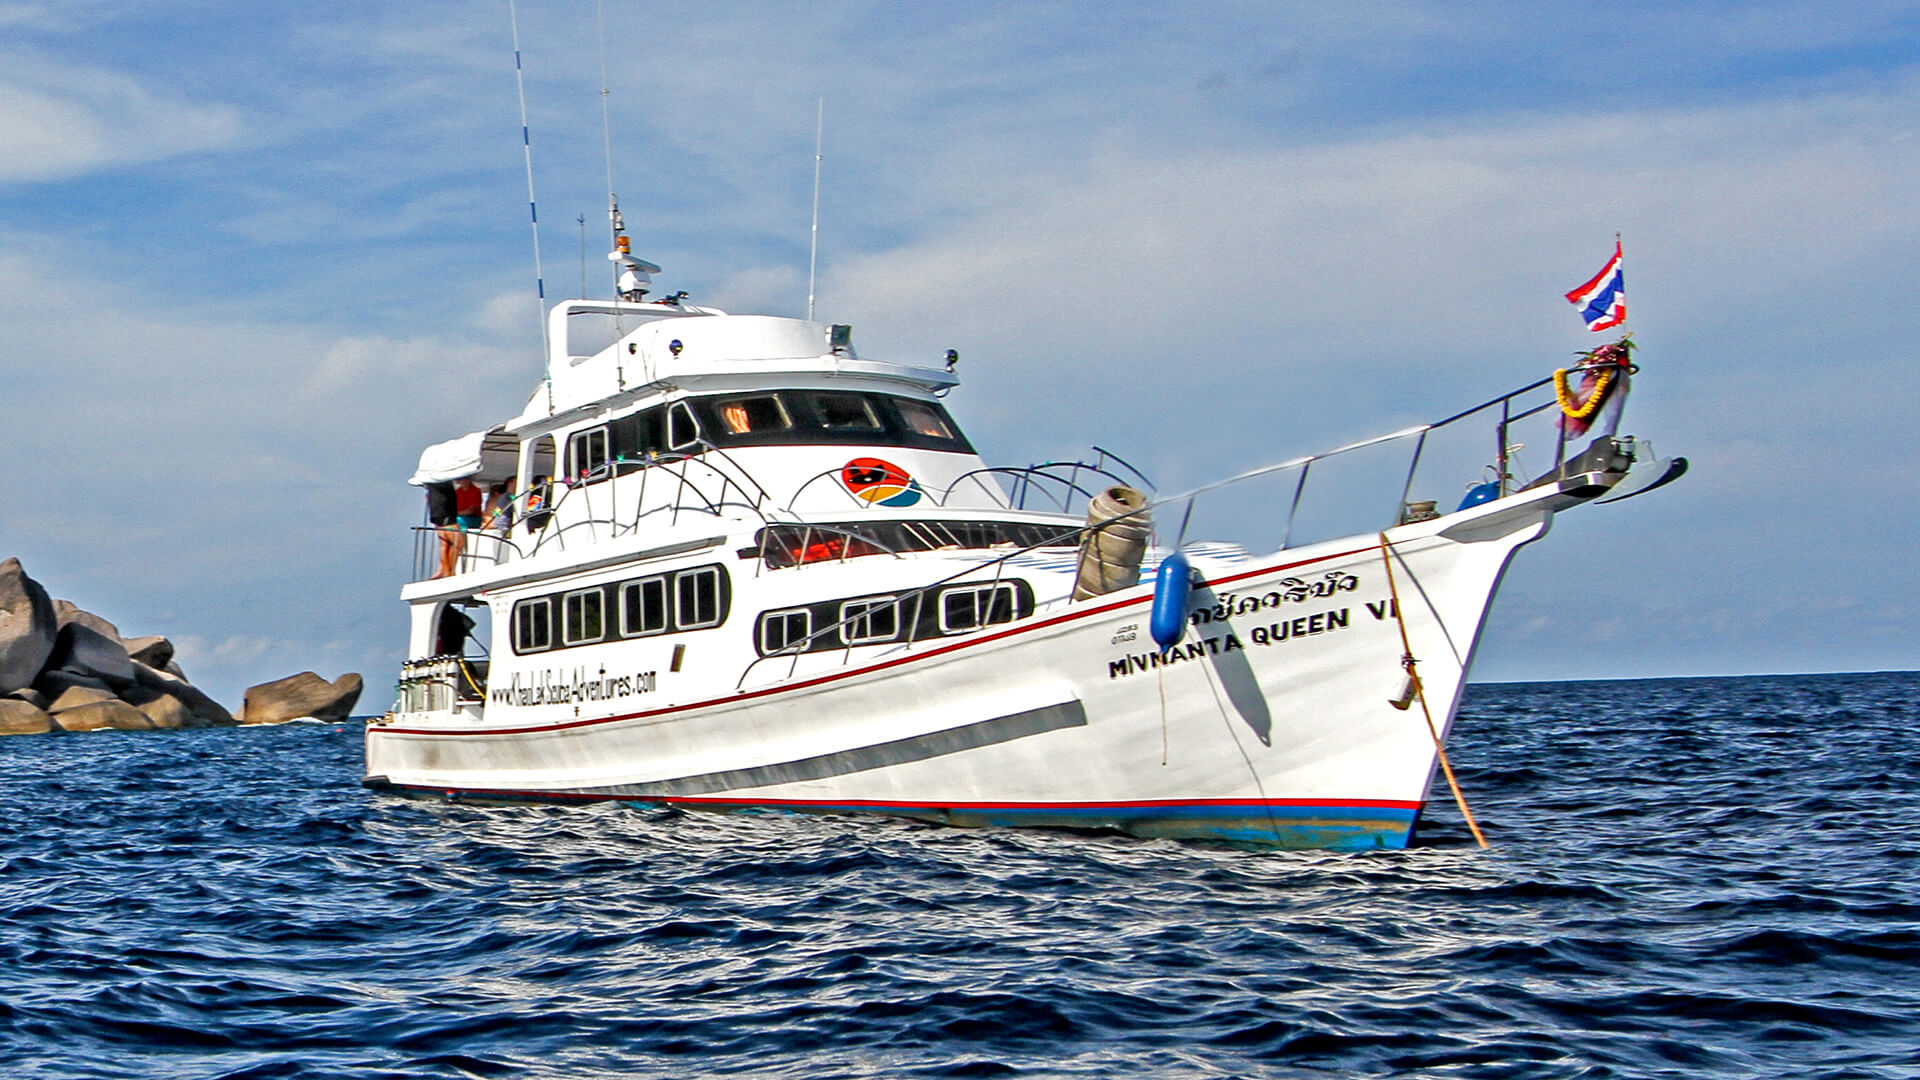 Similan Private Charter With Manta Queen 6